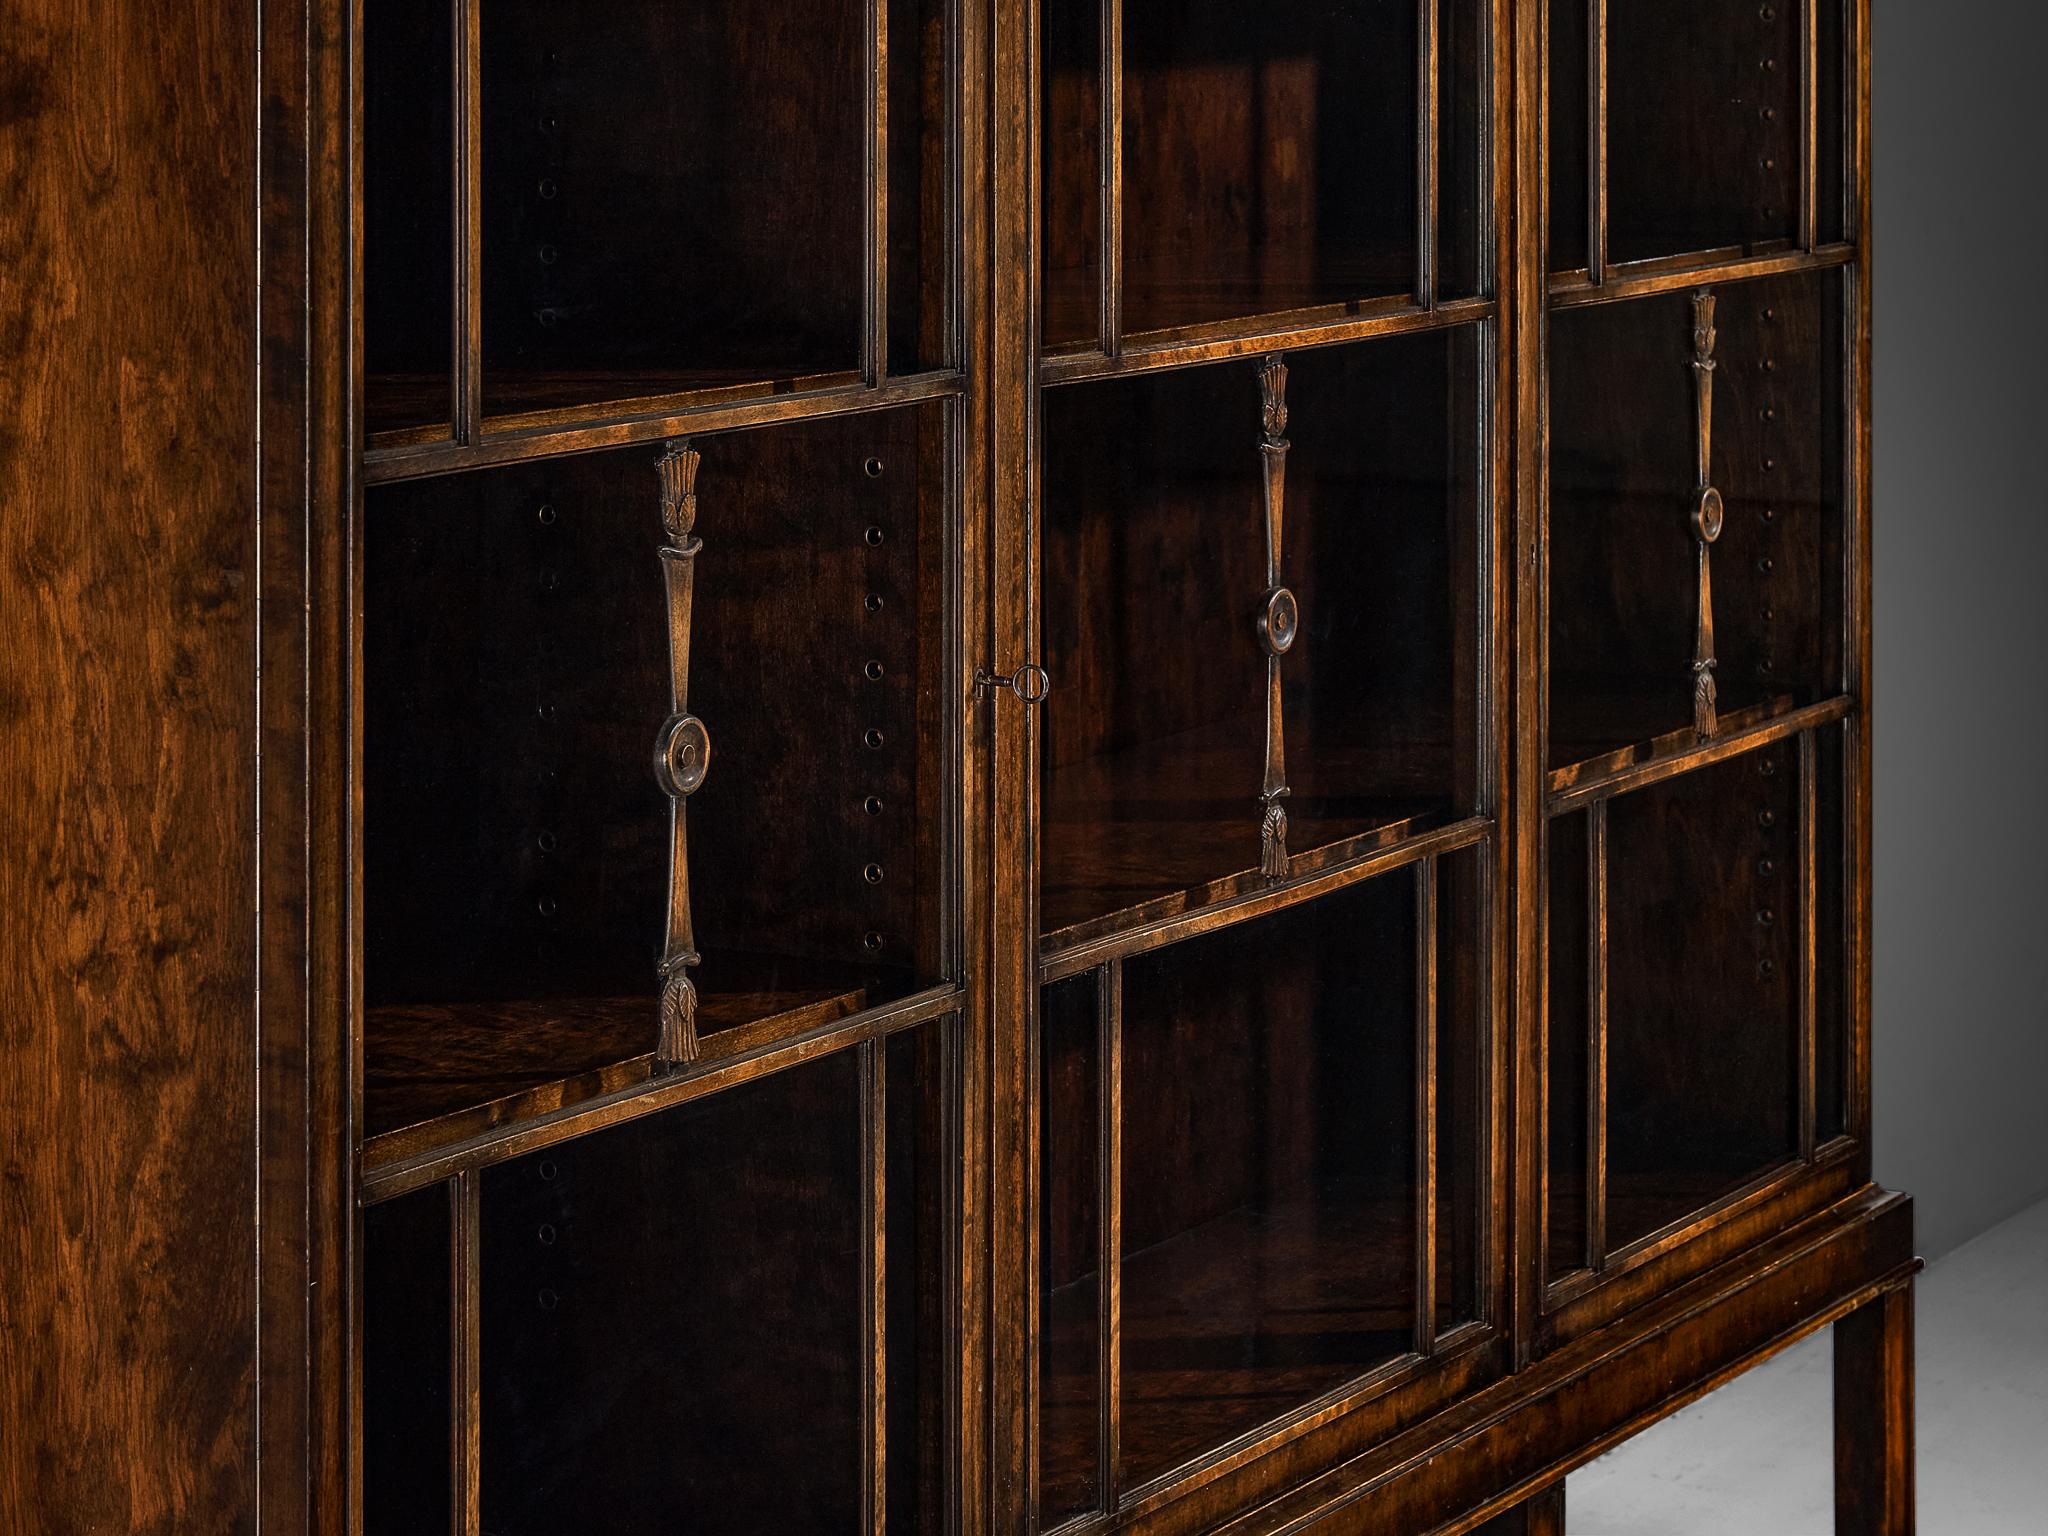 Early 20th Century Axel Einar Hjorth for Nordiska Kompaniet Bookcase in Birch and Glass  For Sale